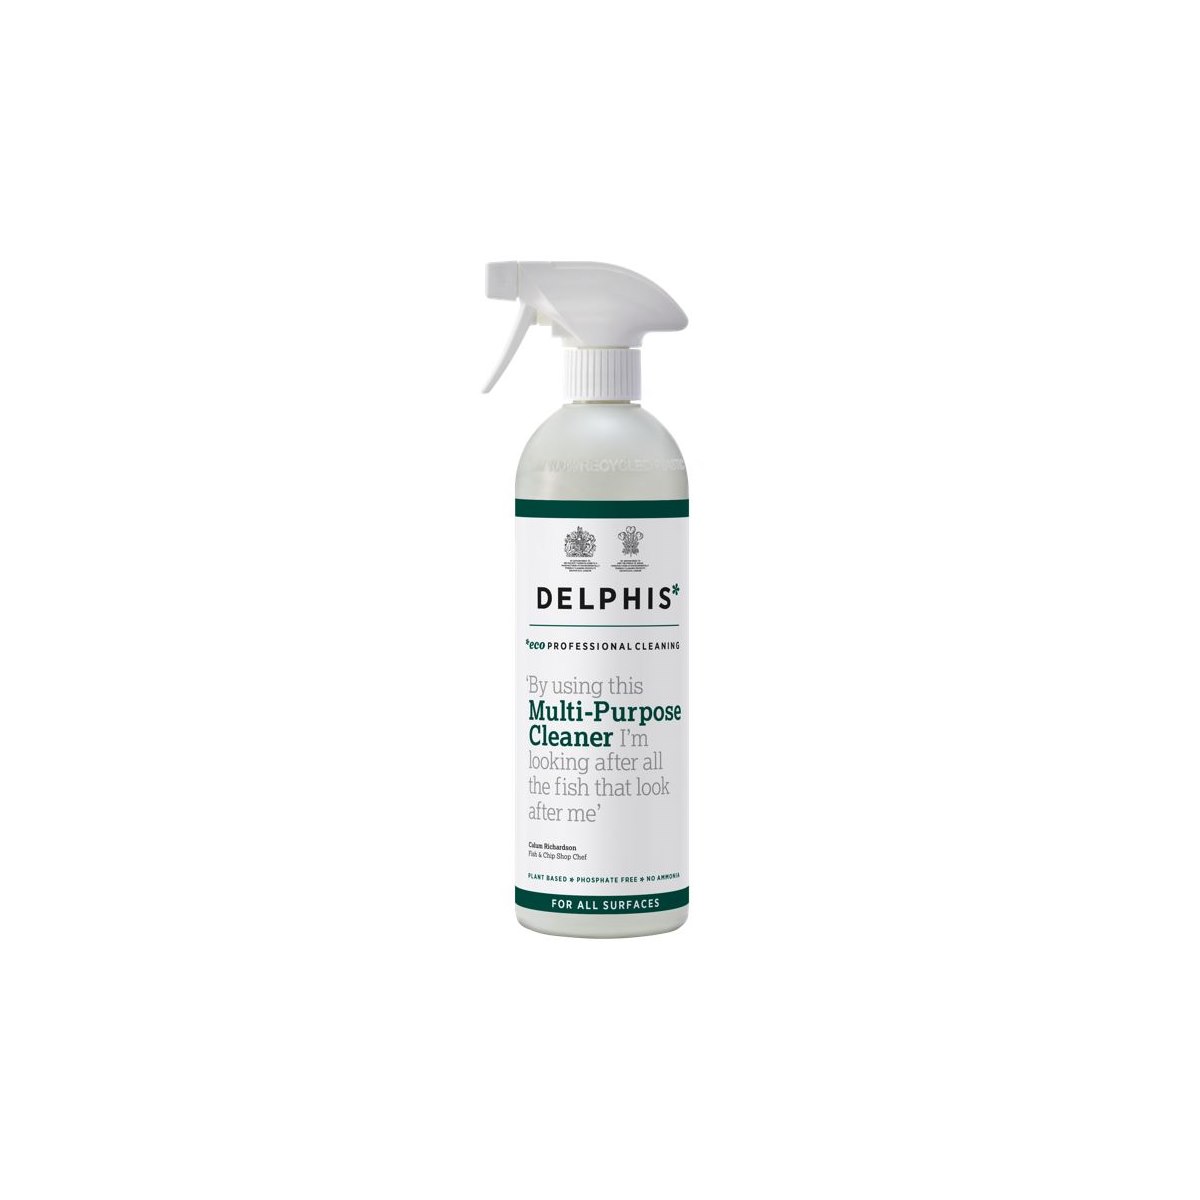 Delphis Eco Professional Cleaning Multi Purpose Cleaner Spray